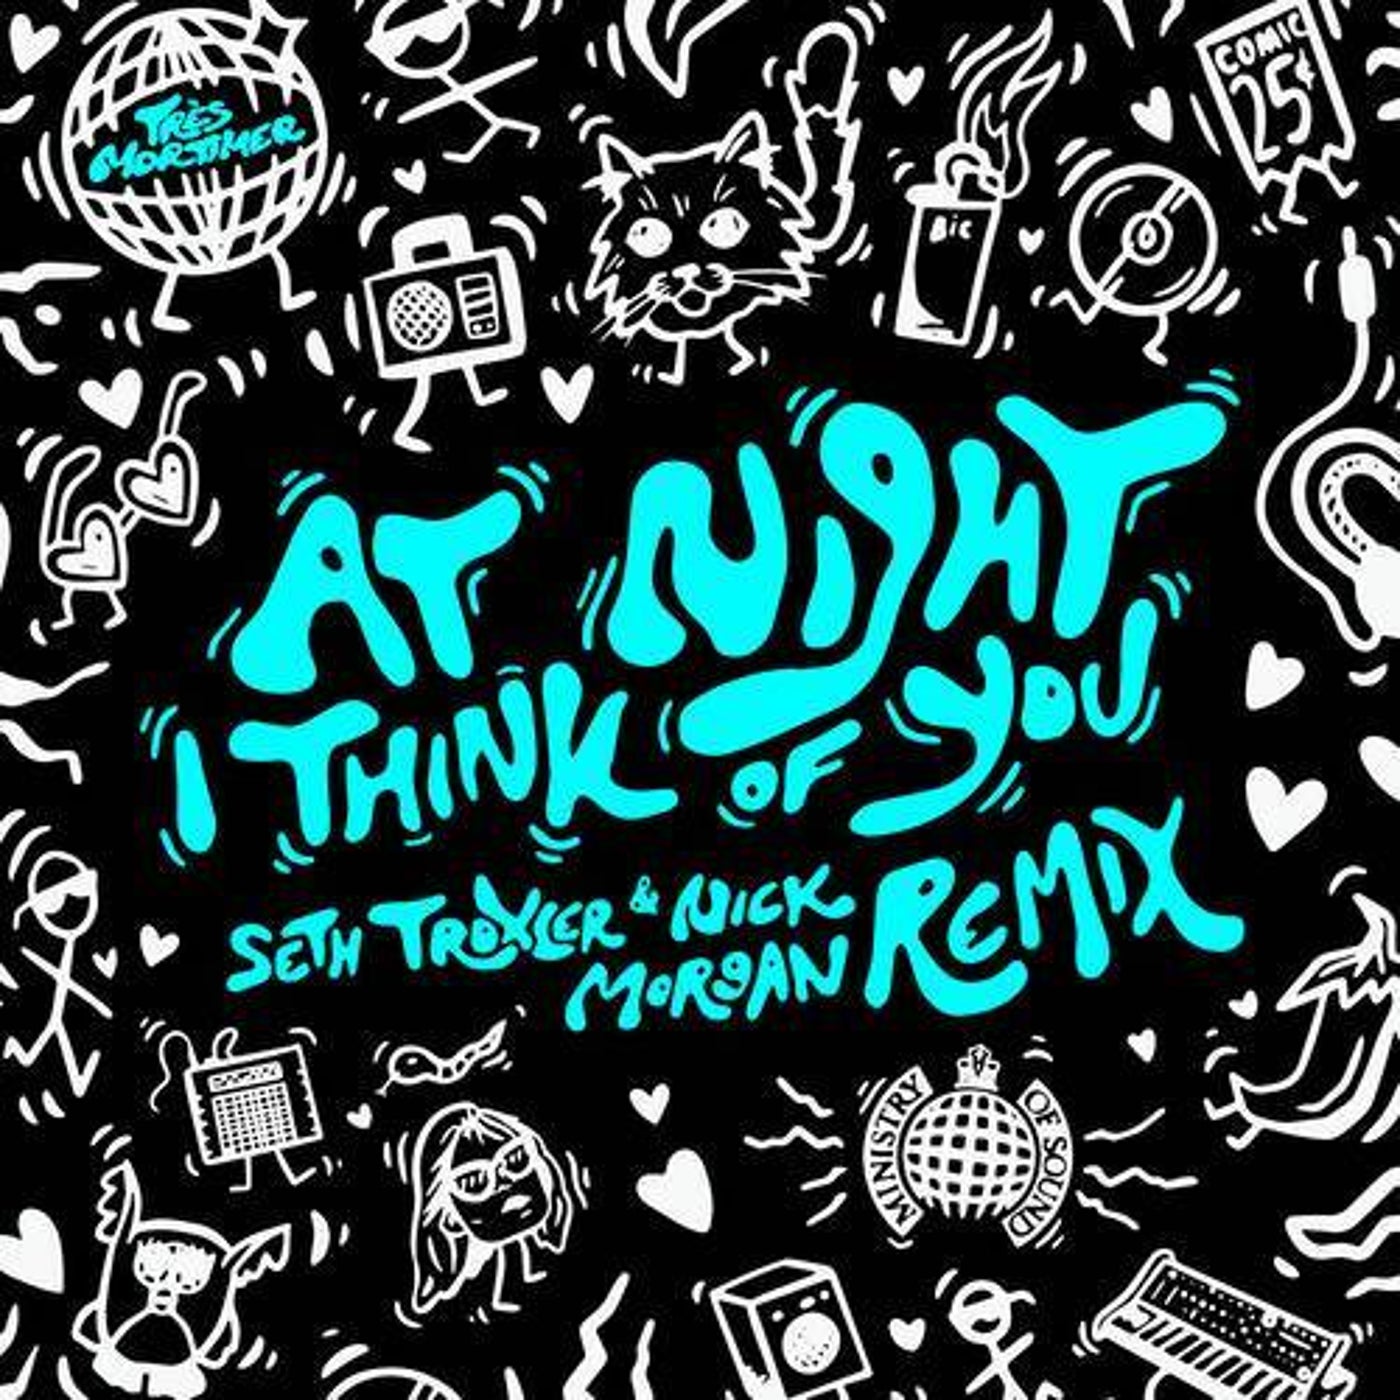 image cover: Très Mortimer - At Night I Think Of You (Seth Troxler & Nick Morgan Extended Remix) on Ministry of Sound Recordings